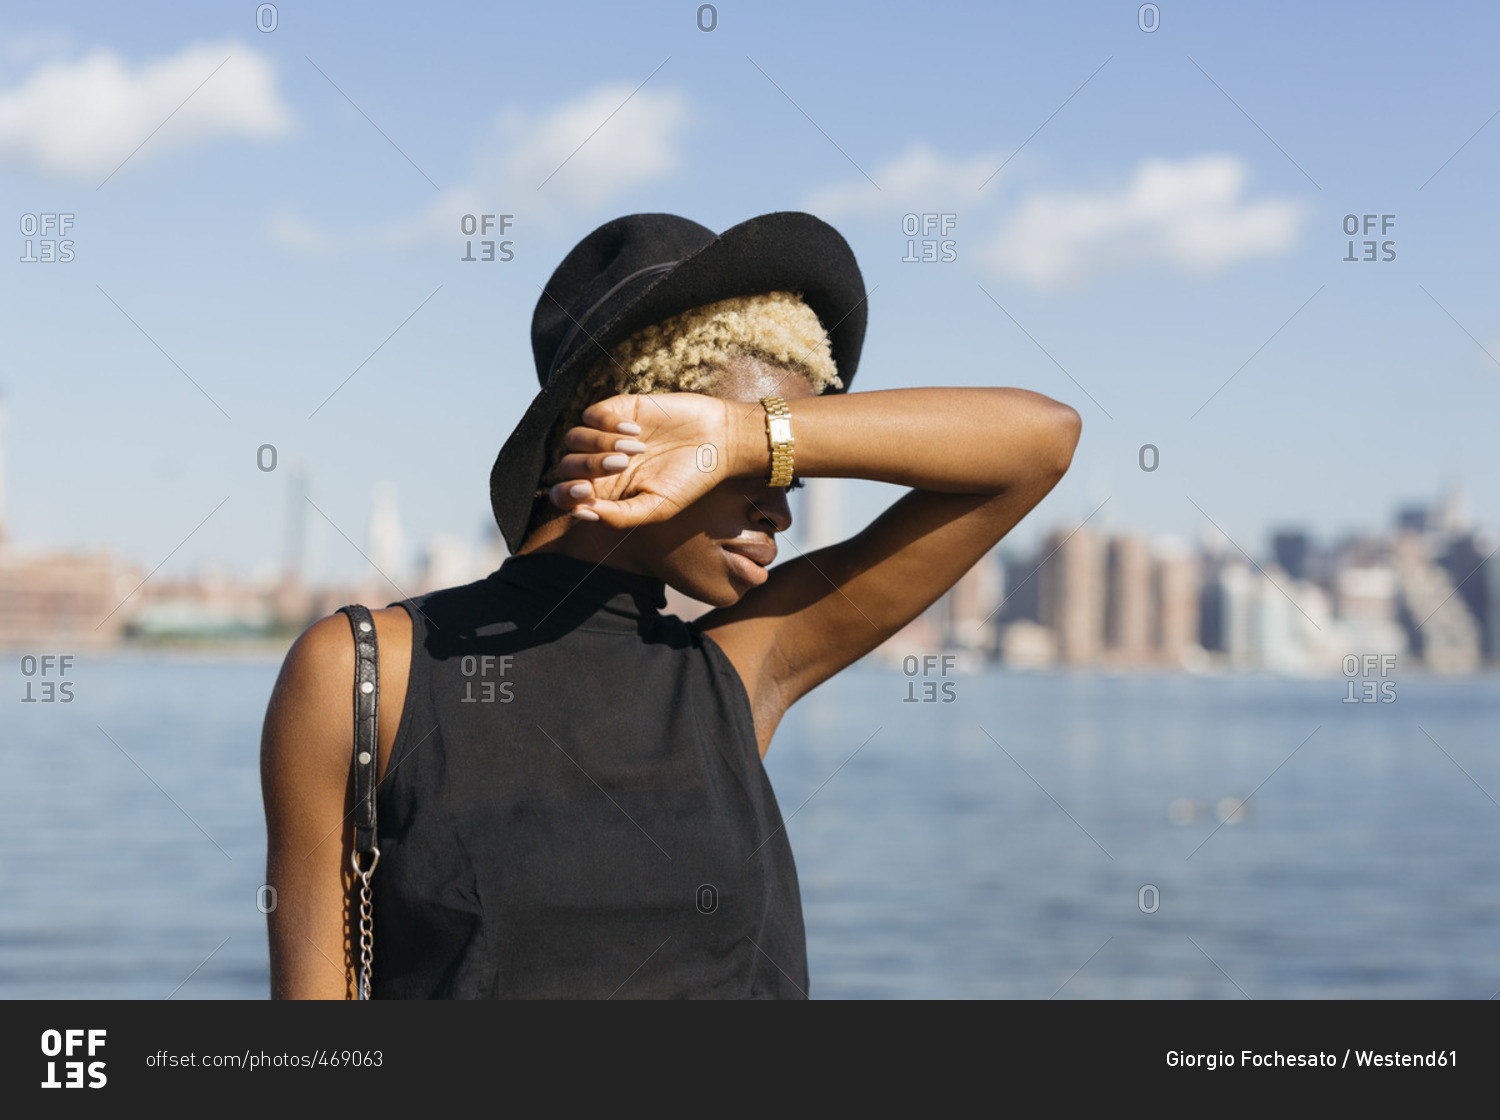 USA- New York City- Brooklyn- young woman at East River wearing a hat